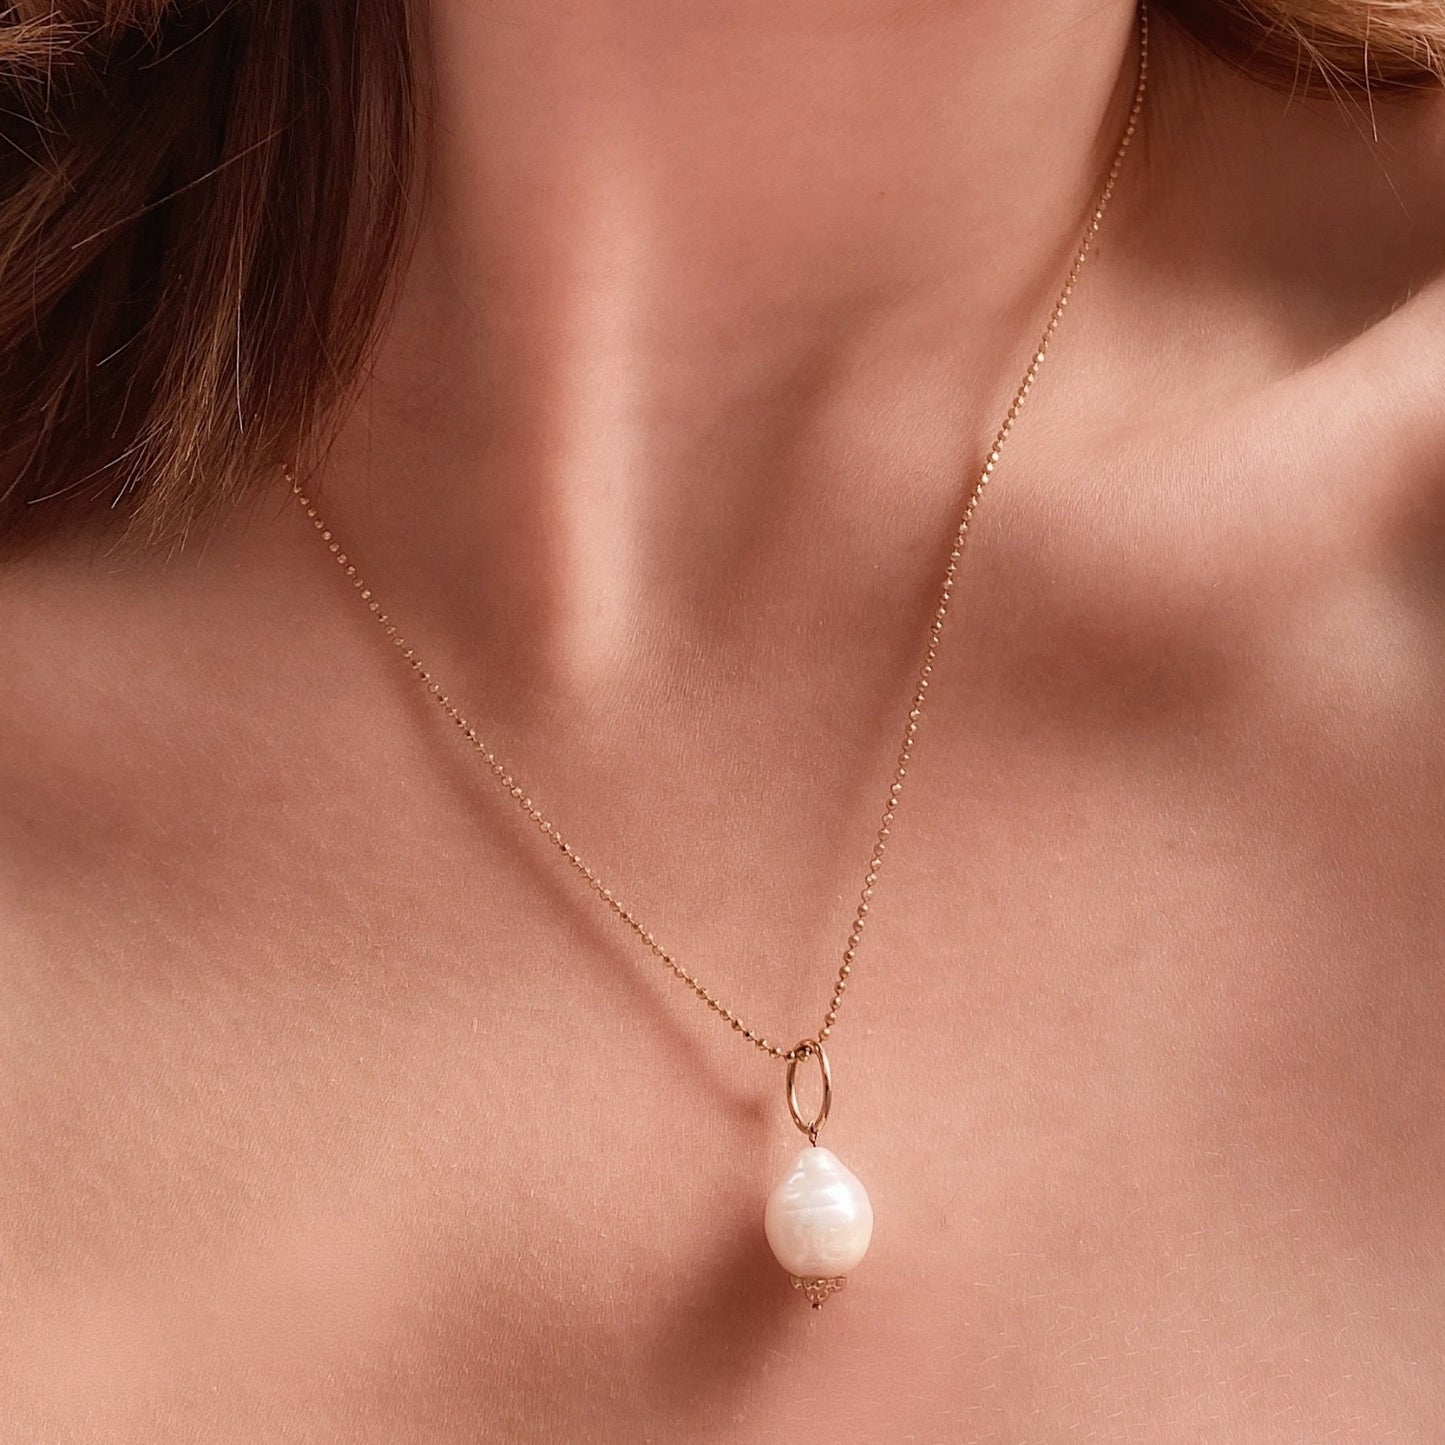 14k gold Diamond Cut Bead Chain Necklace. Styled on a neck with a mini baroque pearl charm